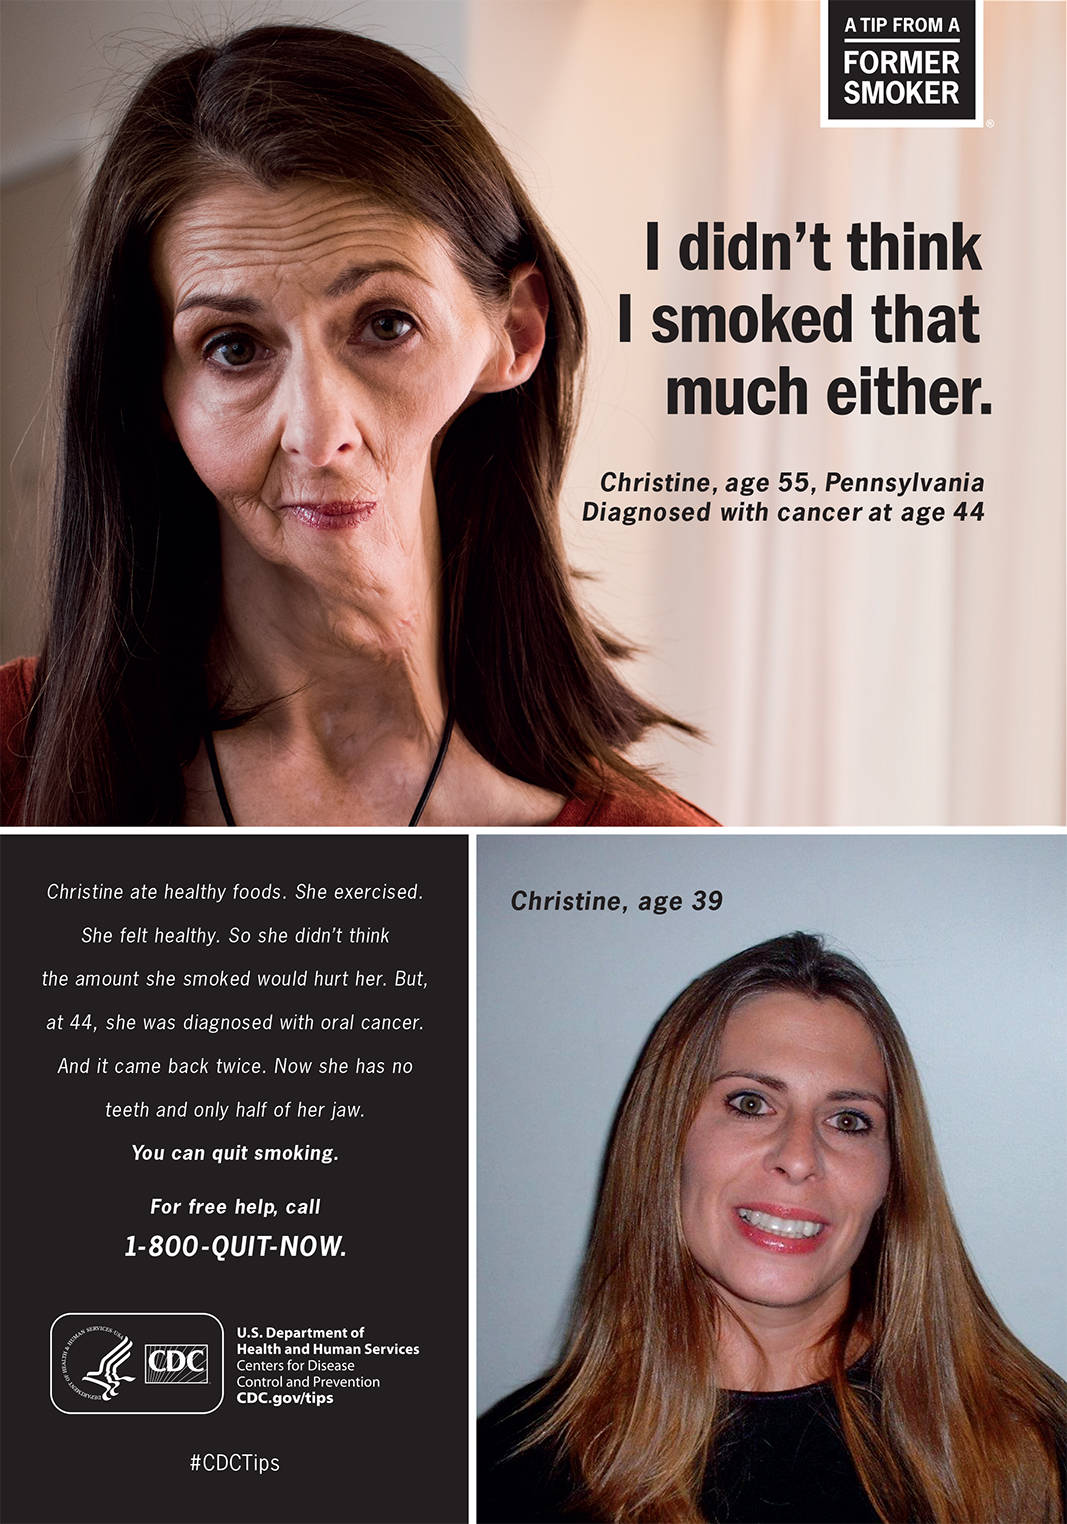 Real people. Real stories. The real impact of tobacco